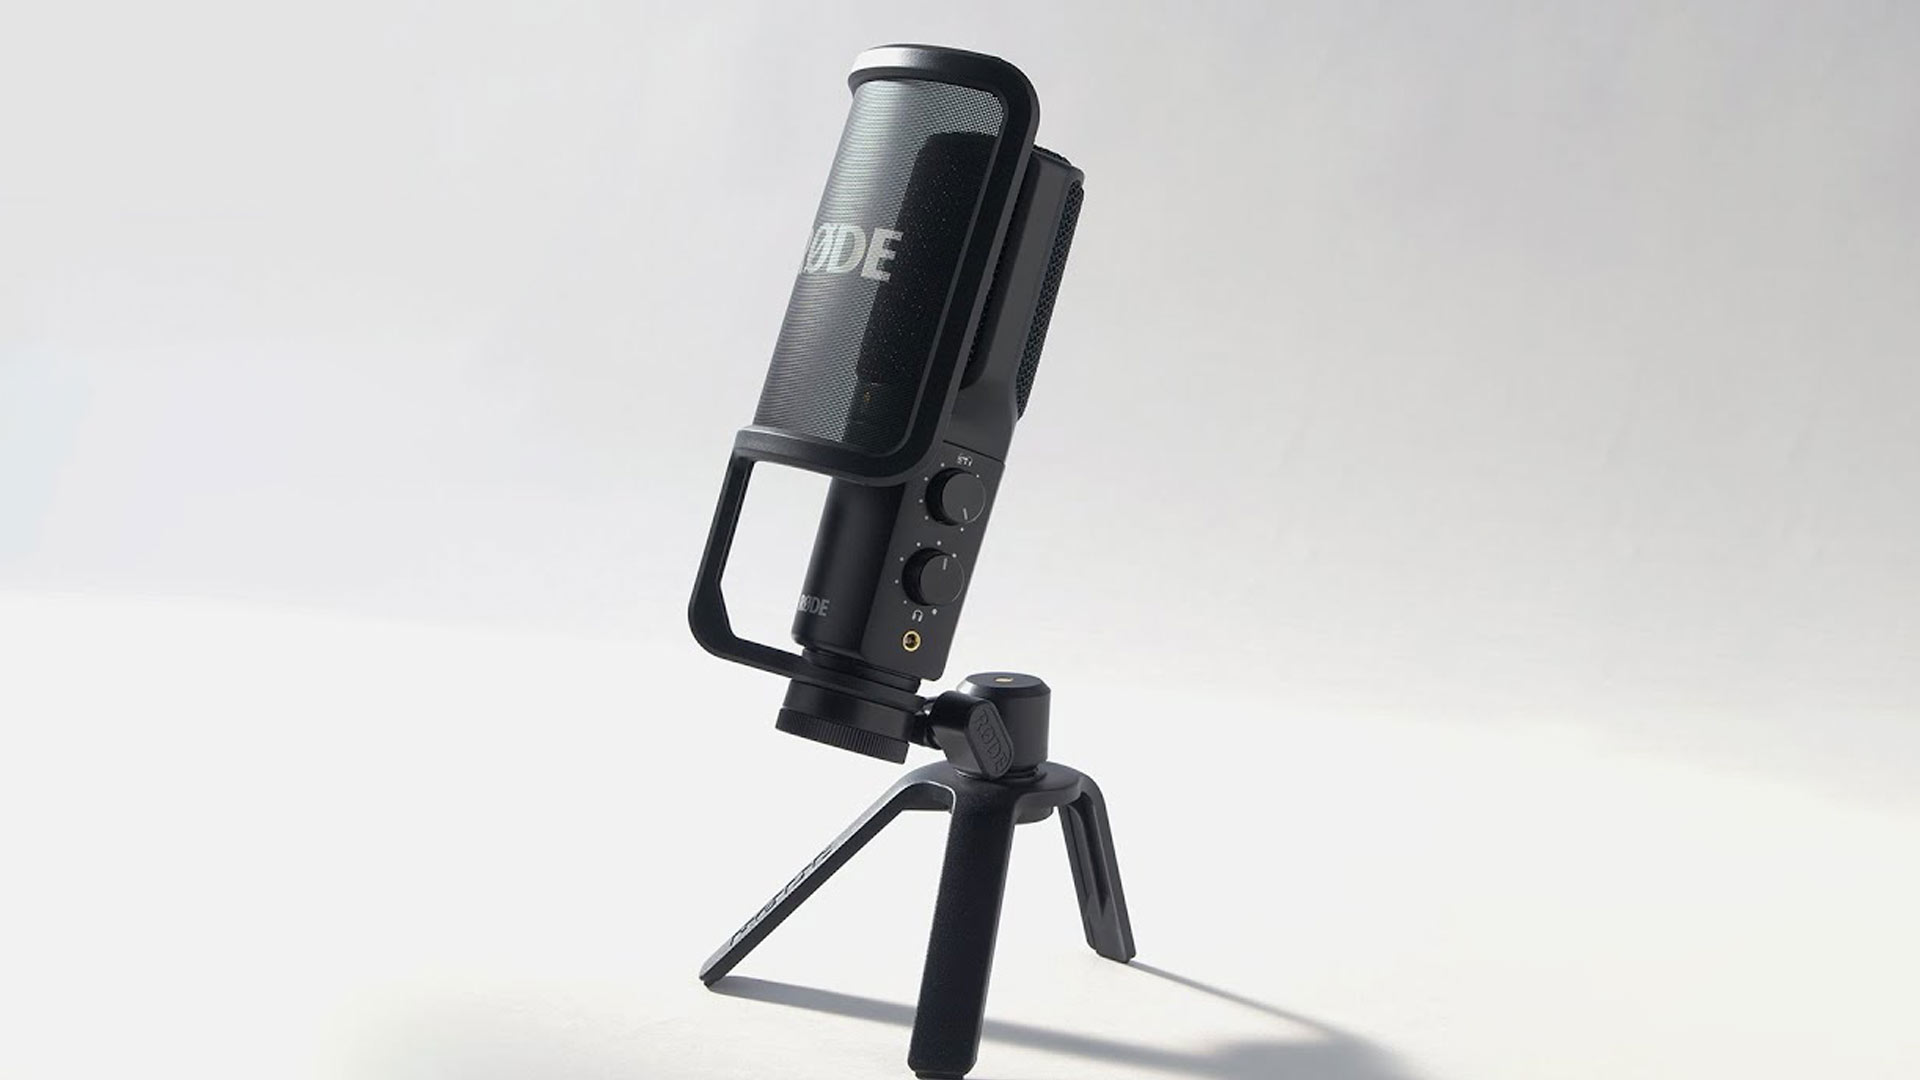 RØDE NT-USB+ Introduced - A Professional USB Condenser Microphone